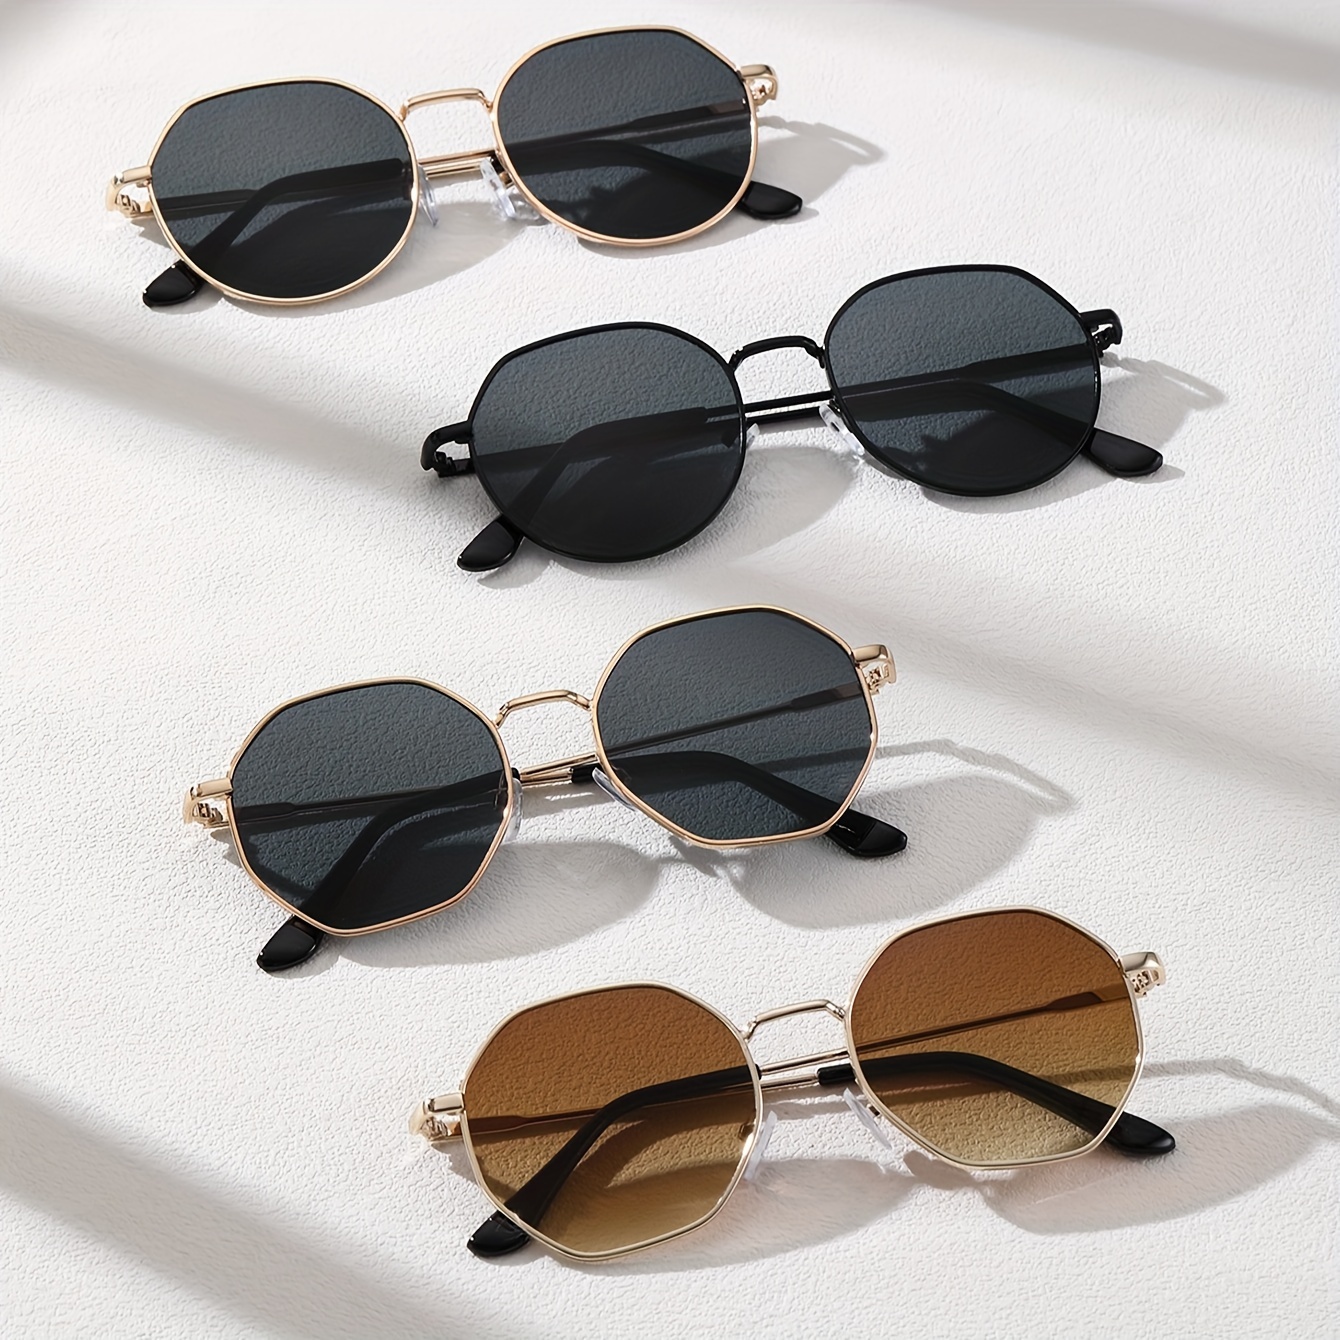 

4pcs Men Retro Classical Fashion Metal Geometric Frame Glasses, For Outdoor, Vacation, Party, Business And Daily Life Decoration